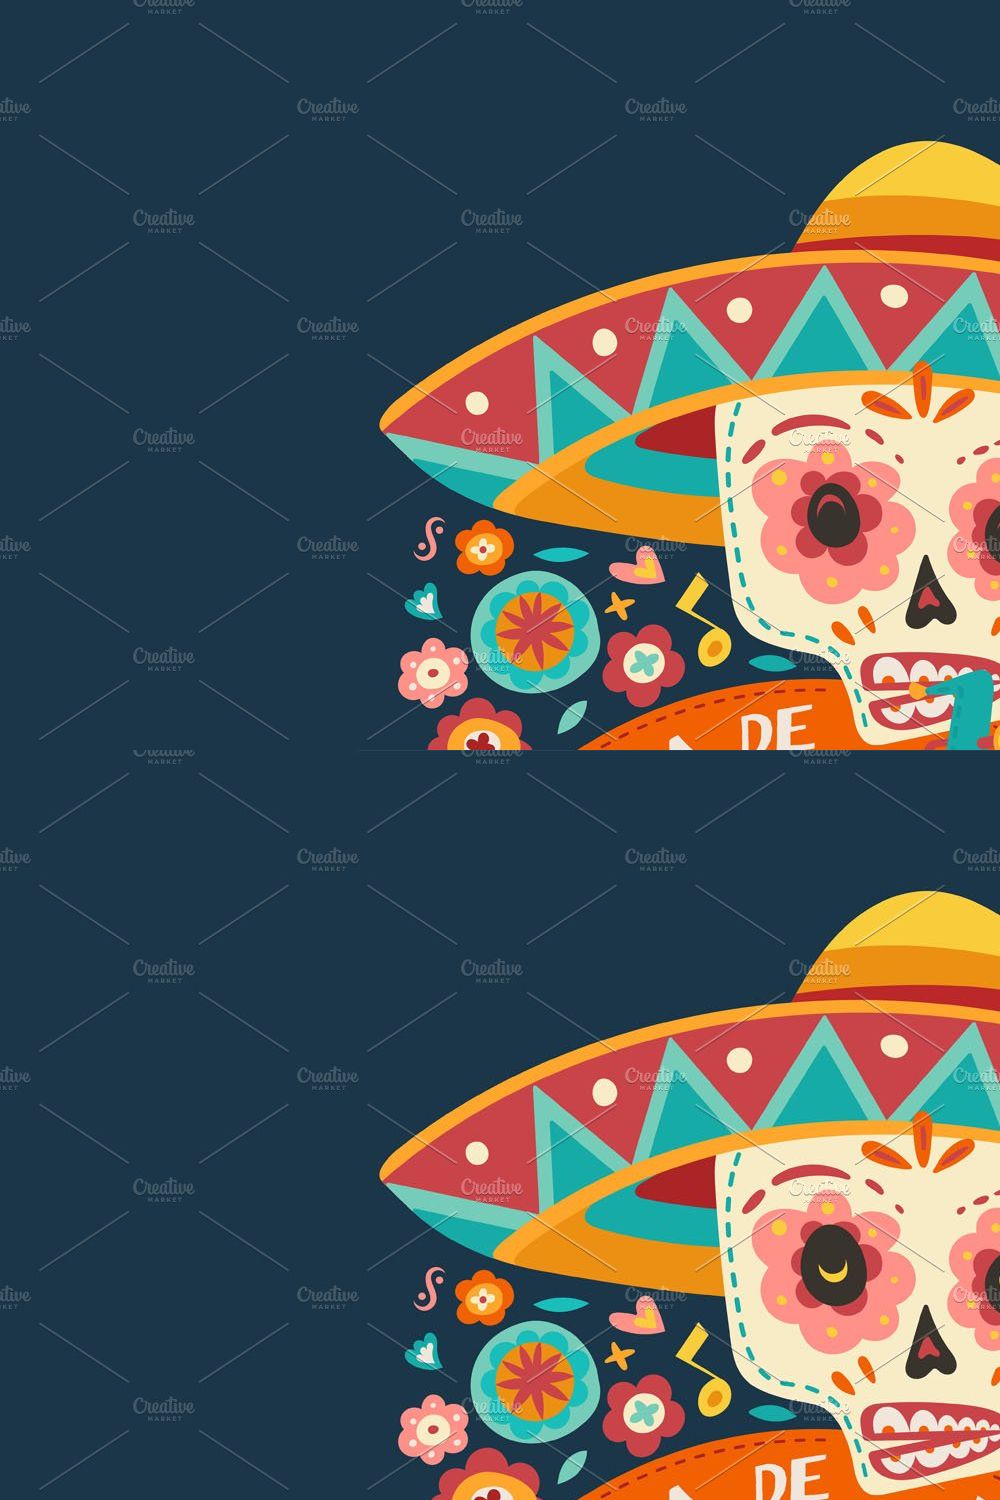 Day of the dead pinterest preview image.